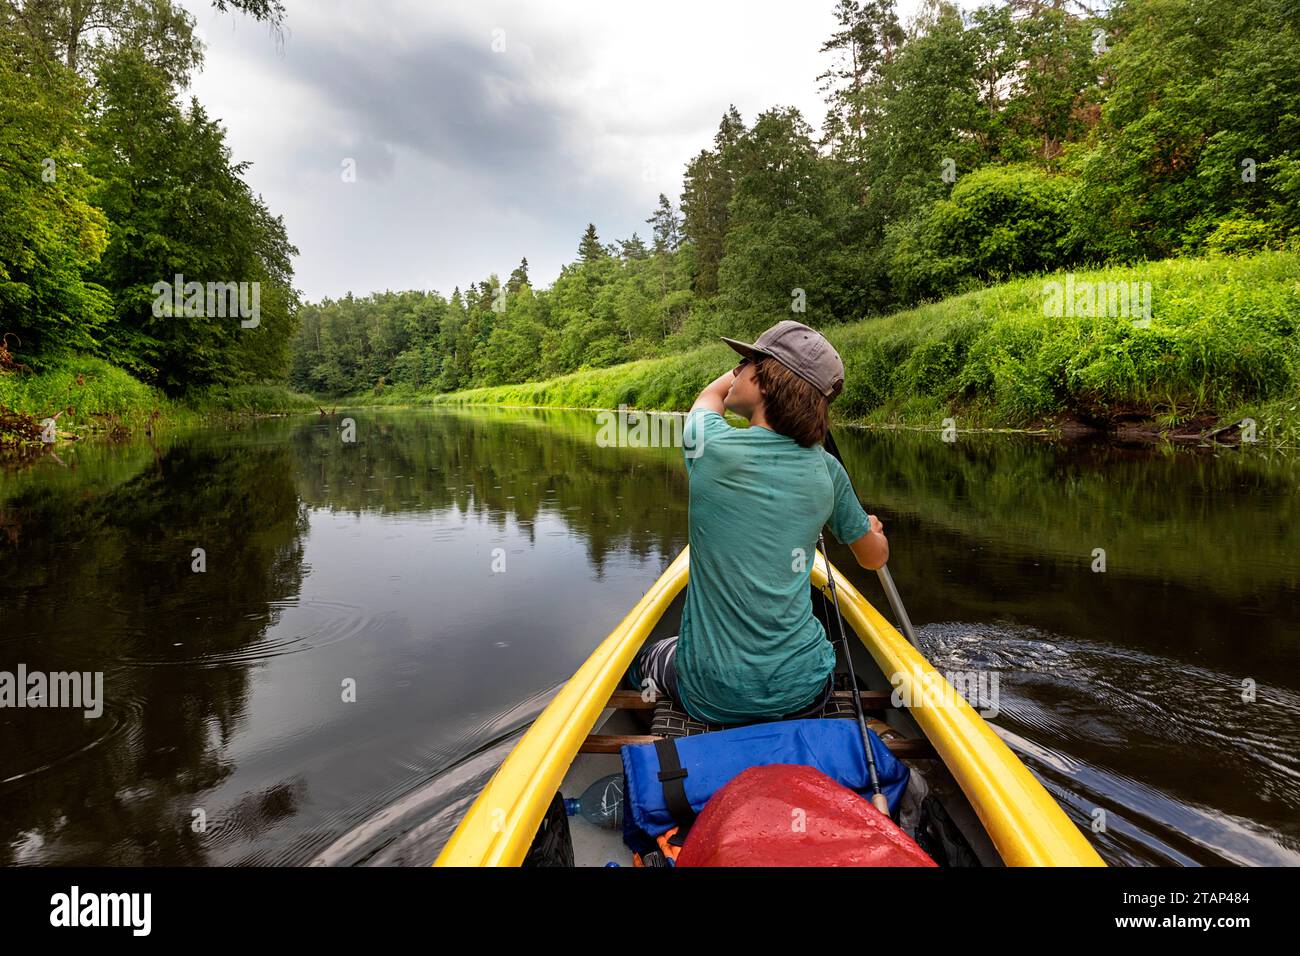 Tourist on a canoe, boat trip on Salaca river, exploring spectacular nature, Devonian red sandstone cliffs and lush forests, Mazsalaca, Latvia Stock Photo